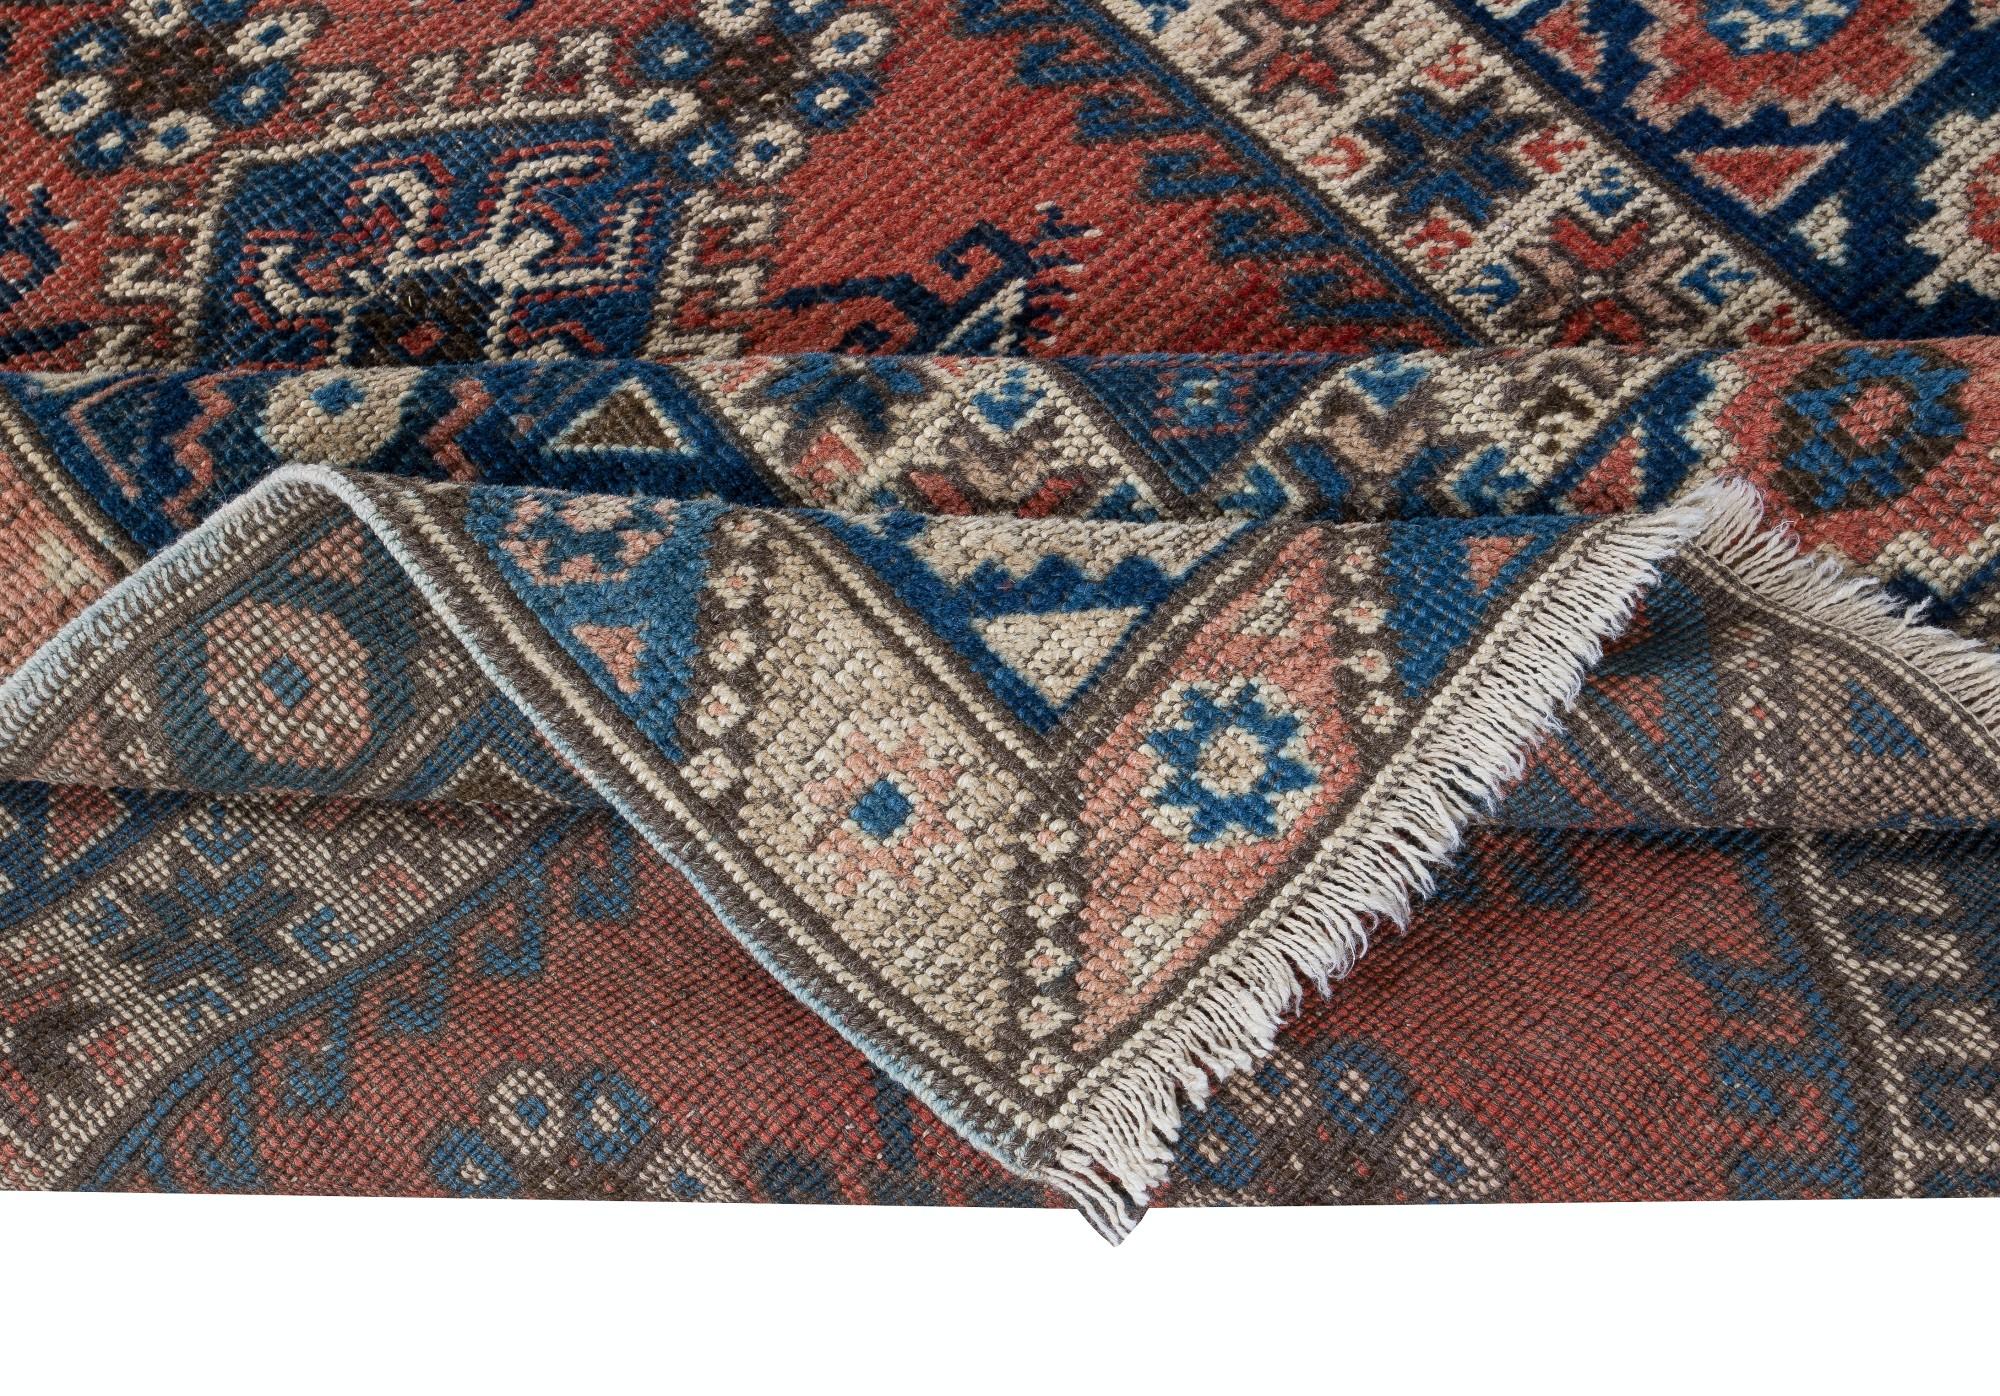 Tribal 4x6 Ft Traditional Vintage Handmade Turkish Rug with Medallions, Colorful Carpet For Sale